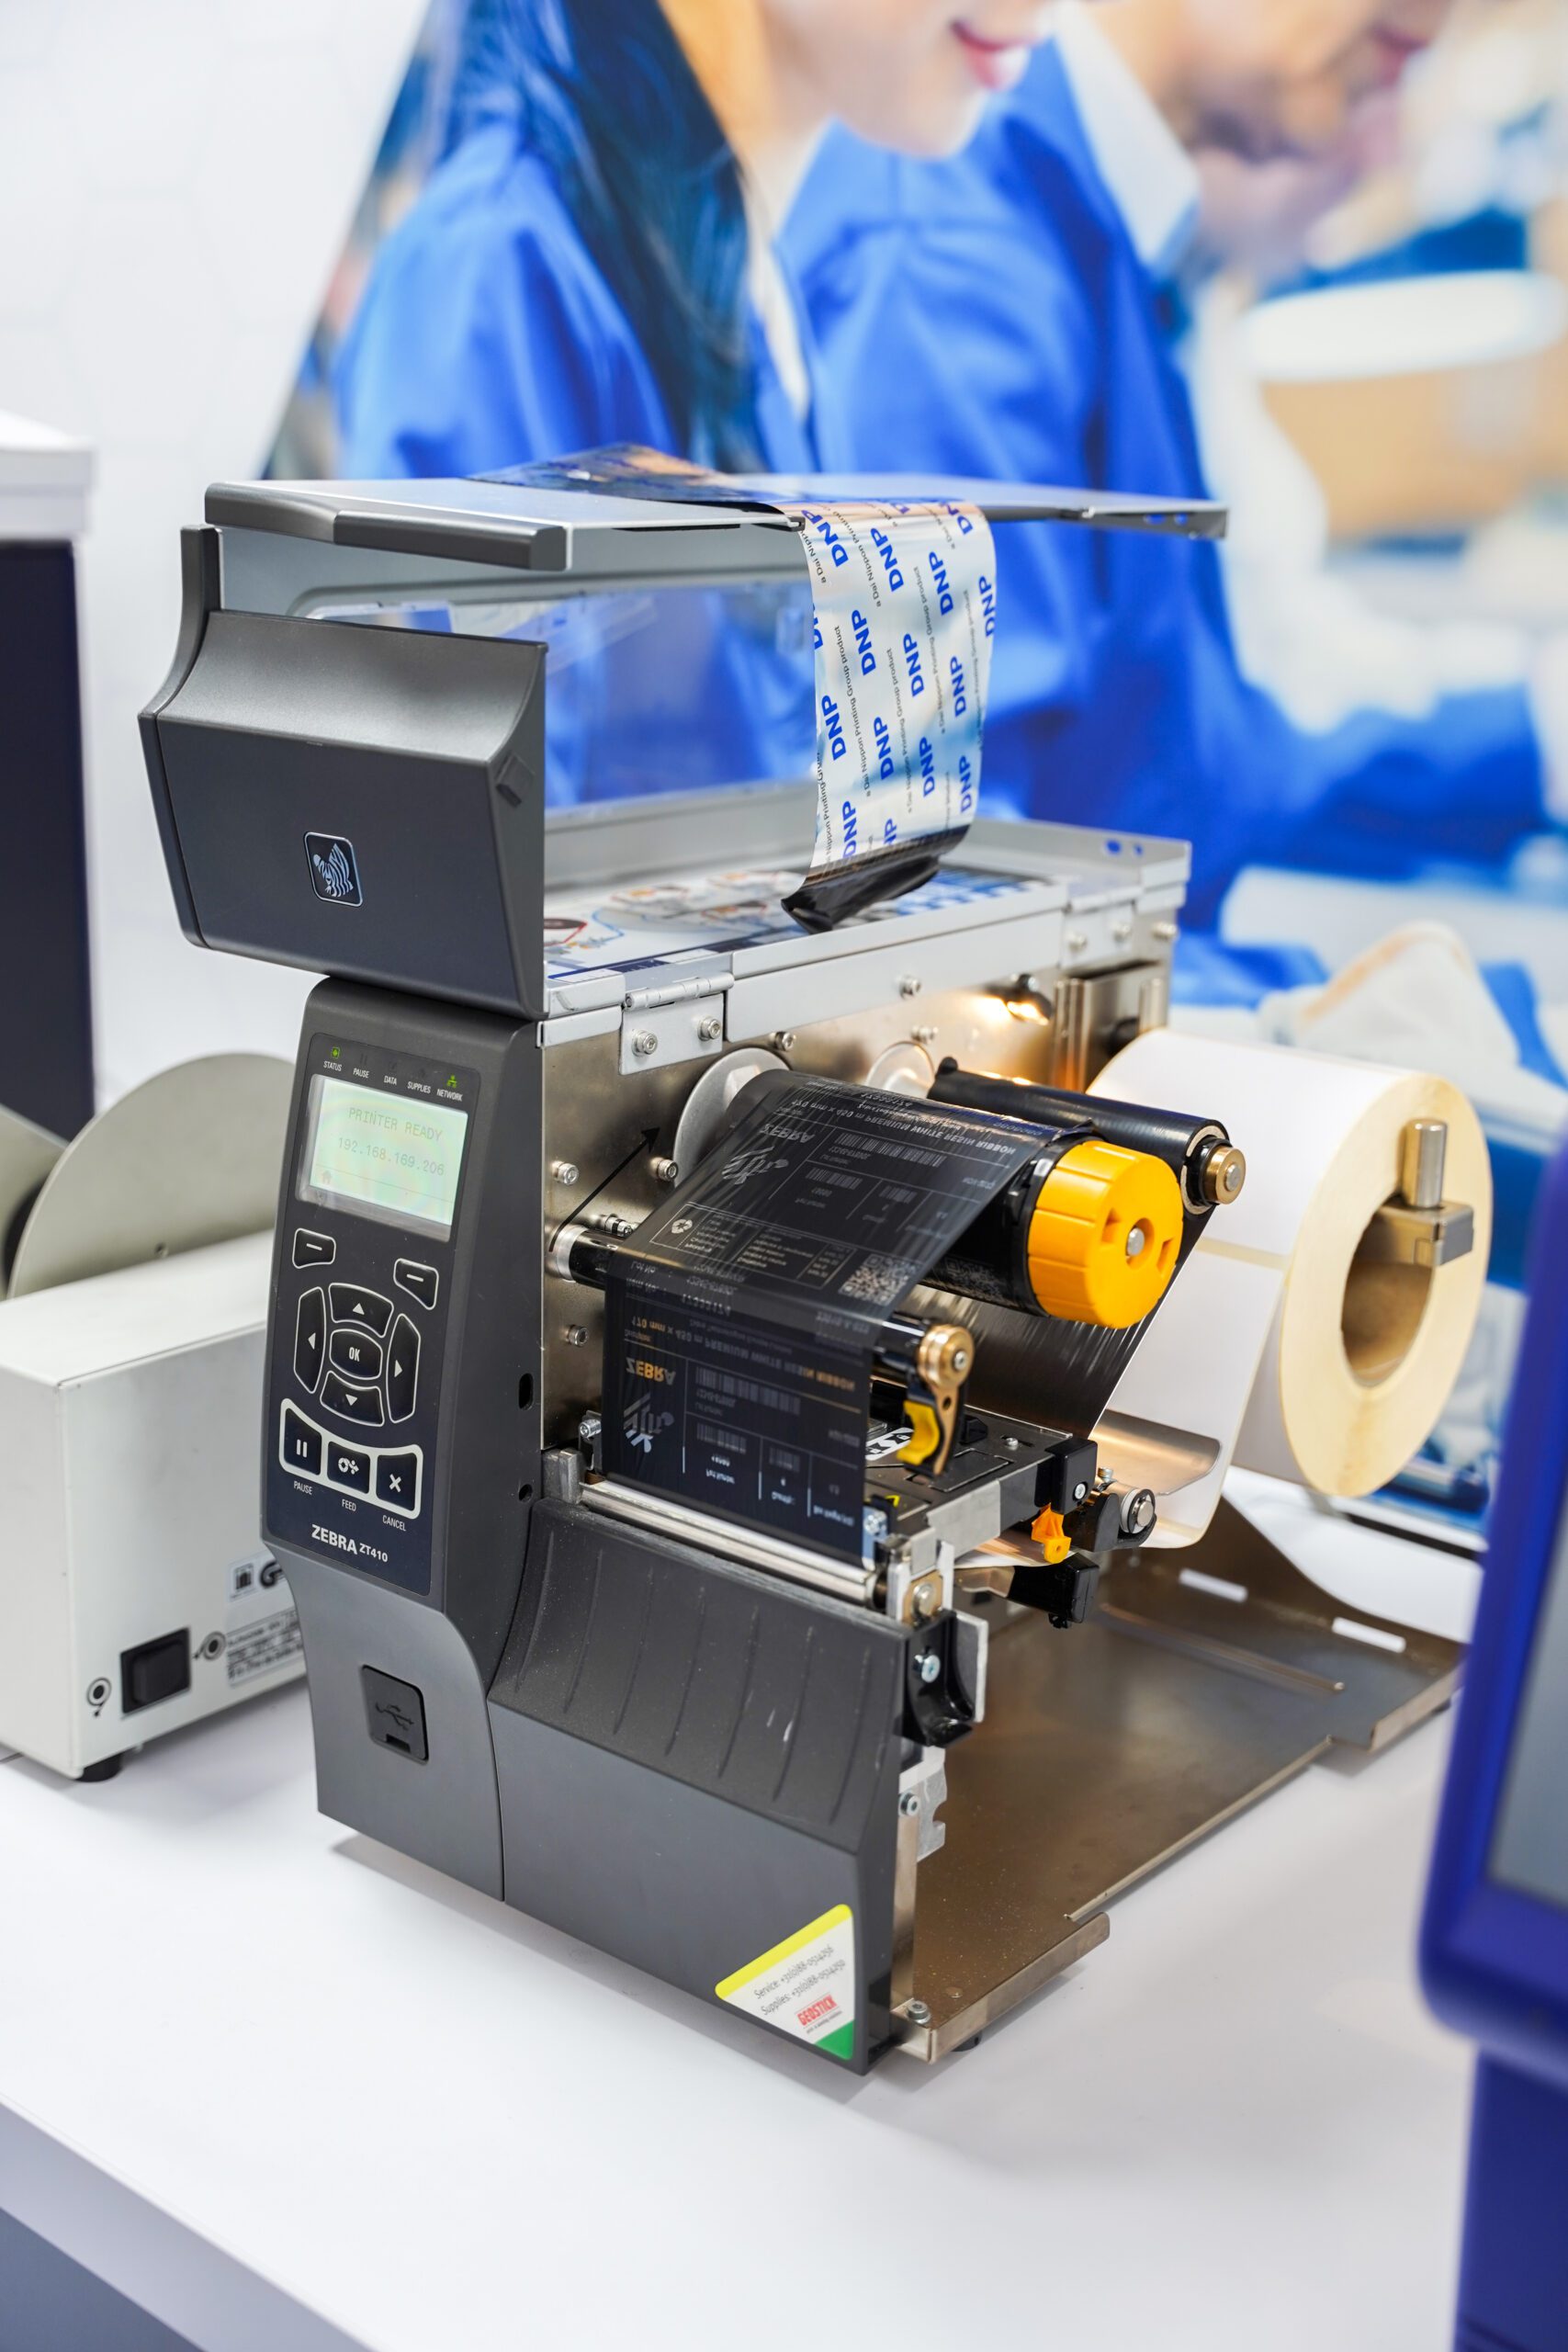 Stand-alone industrial thermal transfer label printer